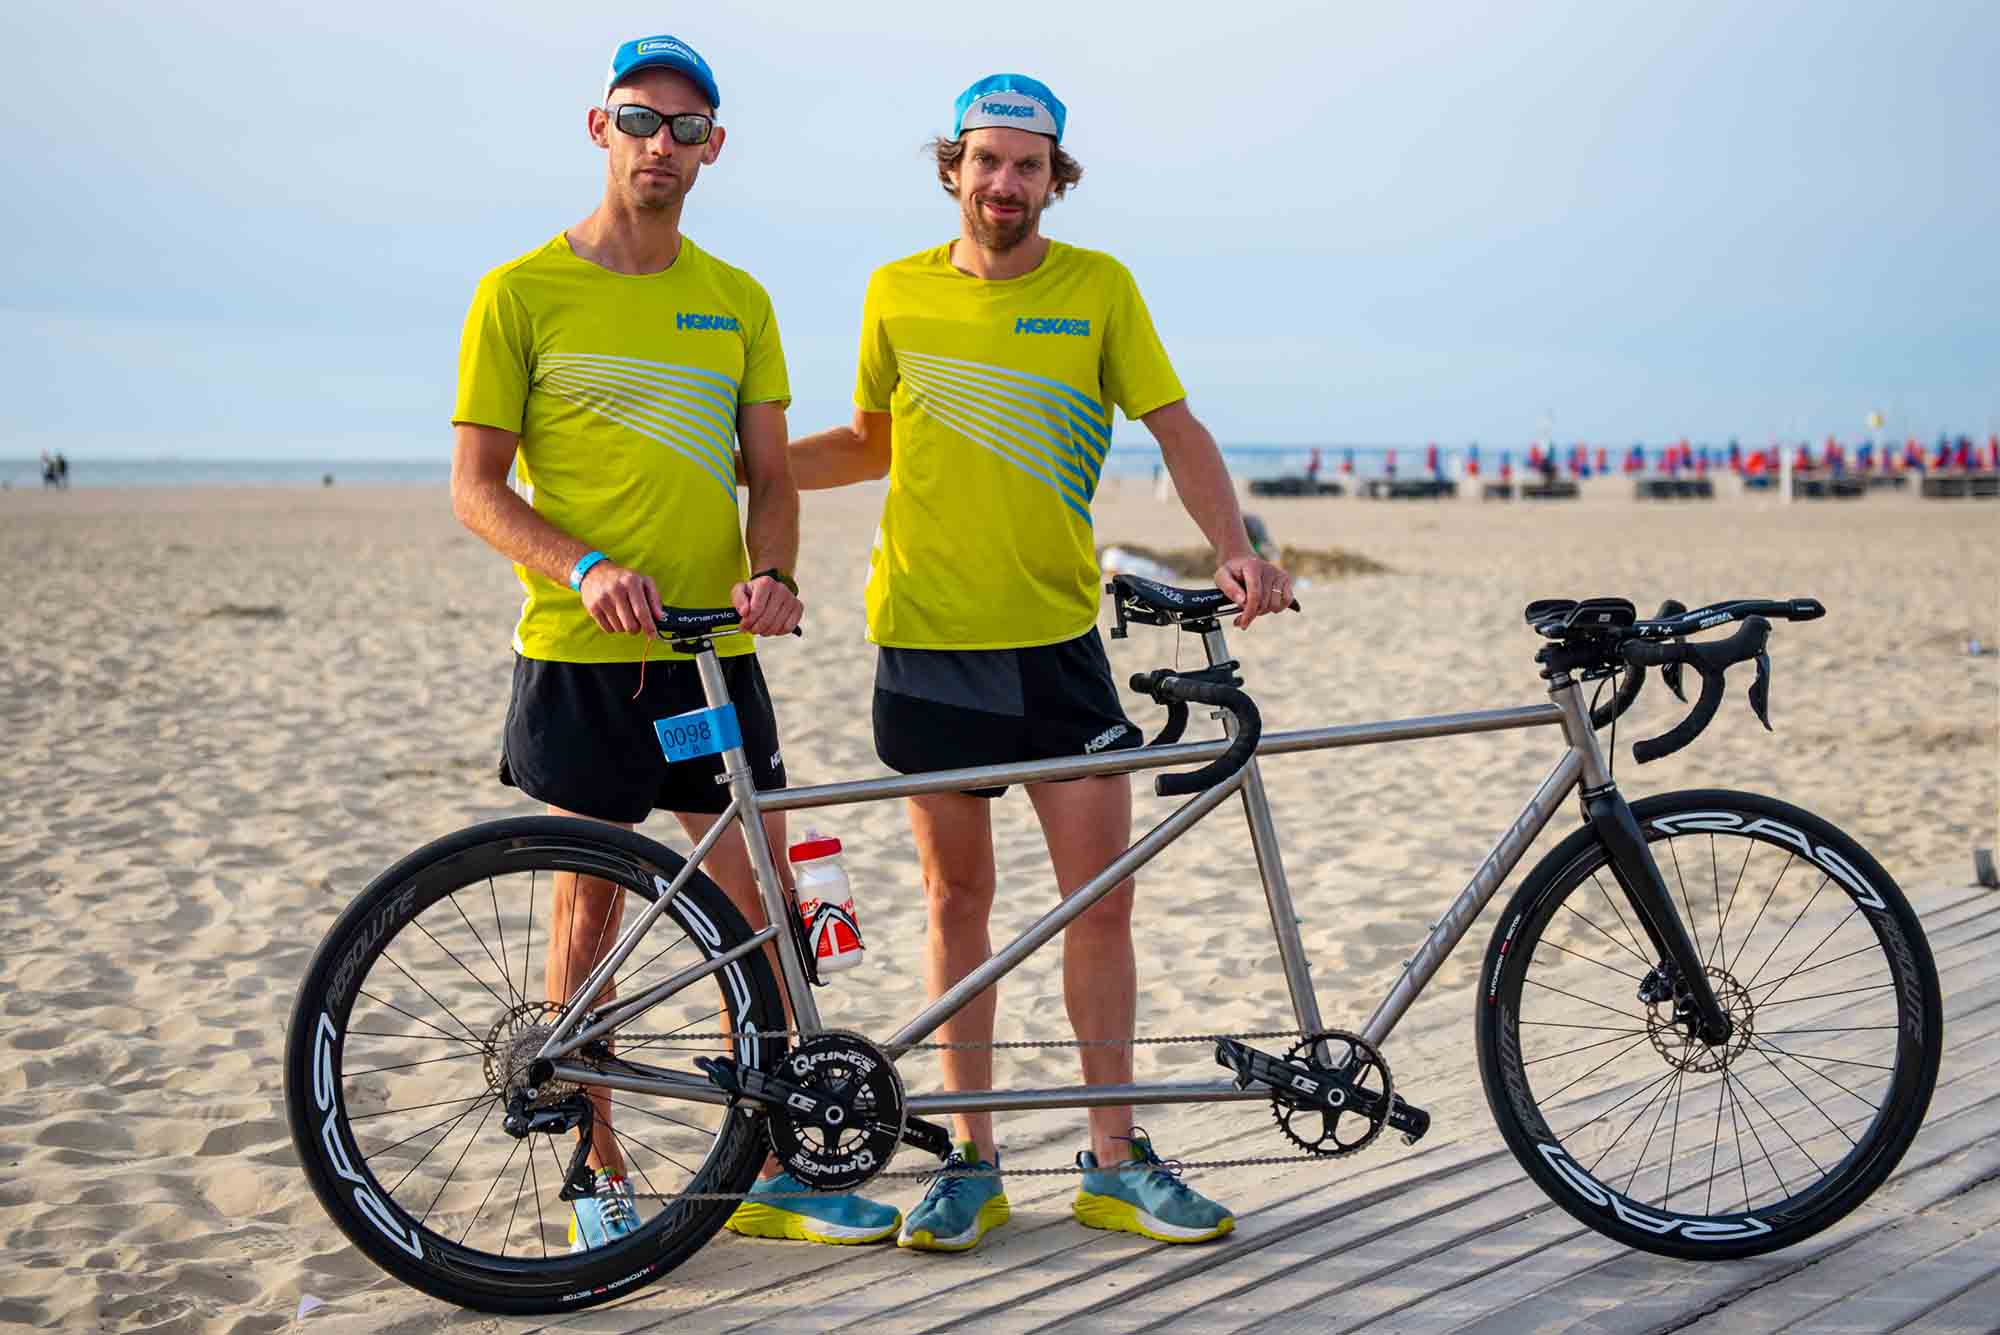 HOKA athletes Antoine Perel and Olivier Lyoen stand by their tandem bike